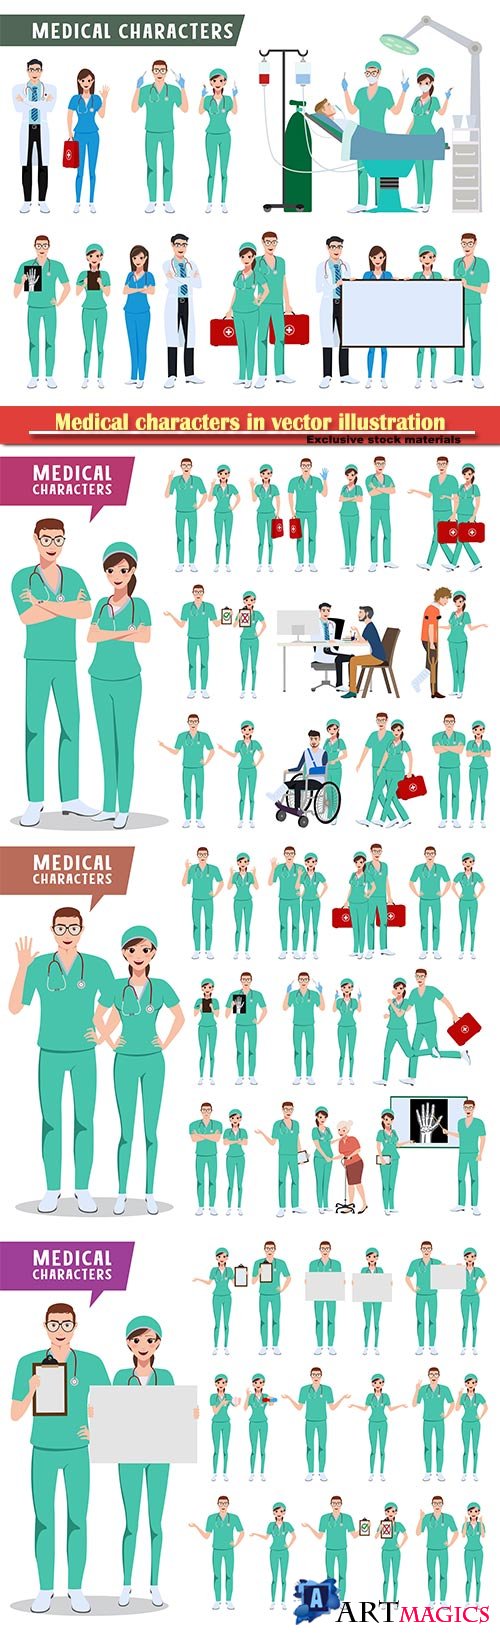 Medical characters in vector illustration